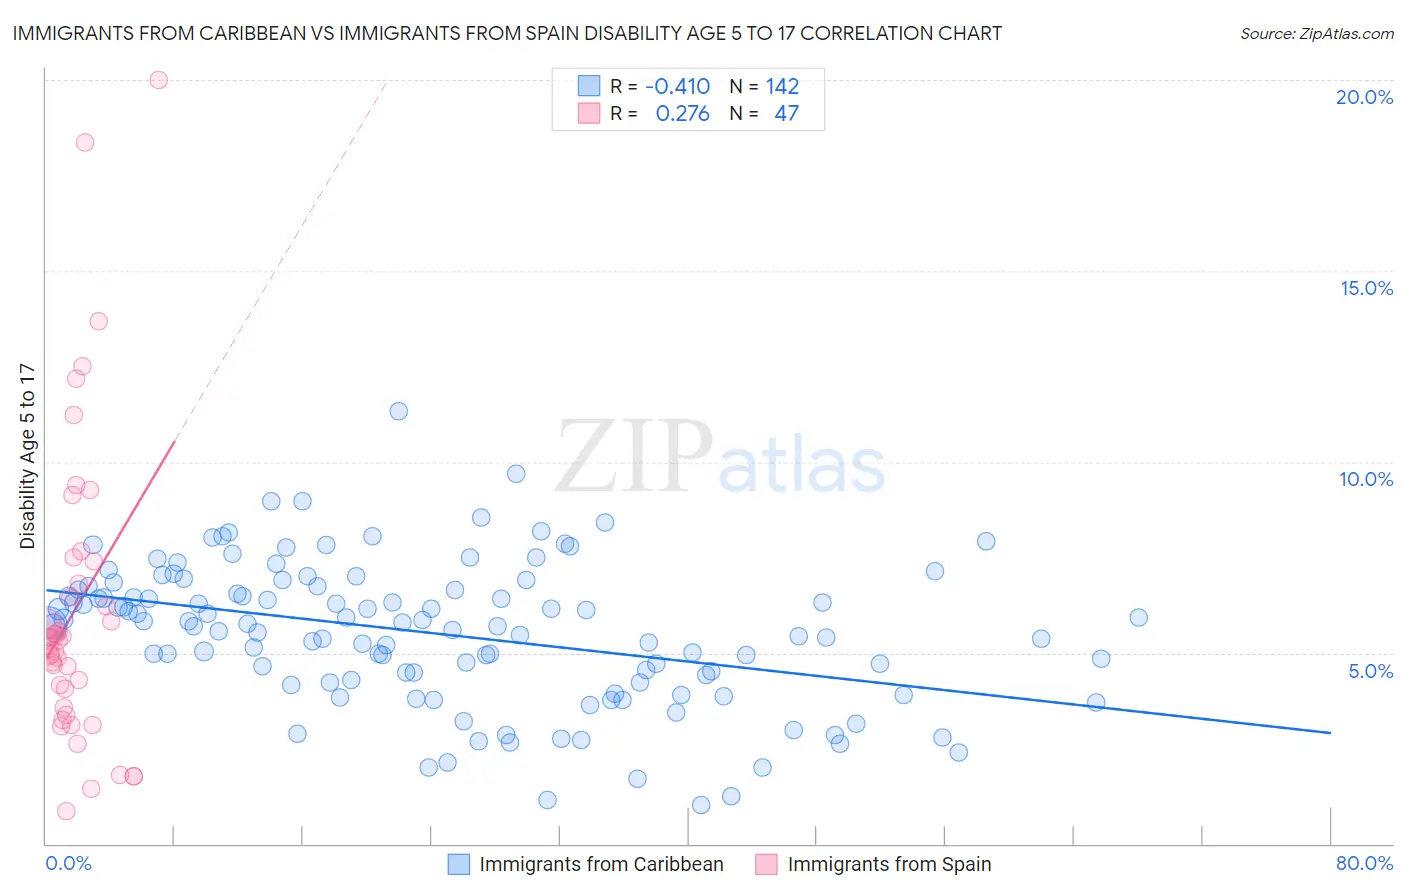 Immigrants from Caribbean vs Immigrants from Spain Disability Age 5 to 17